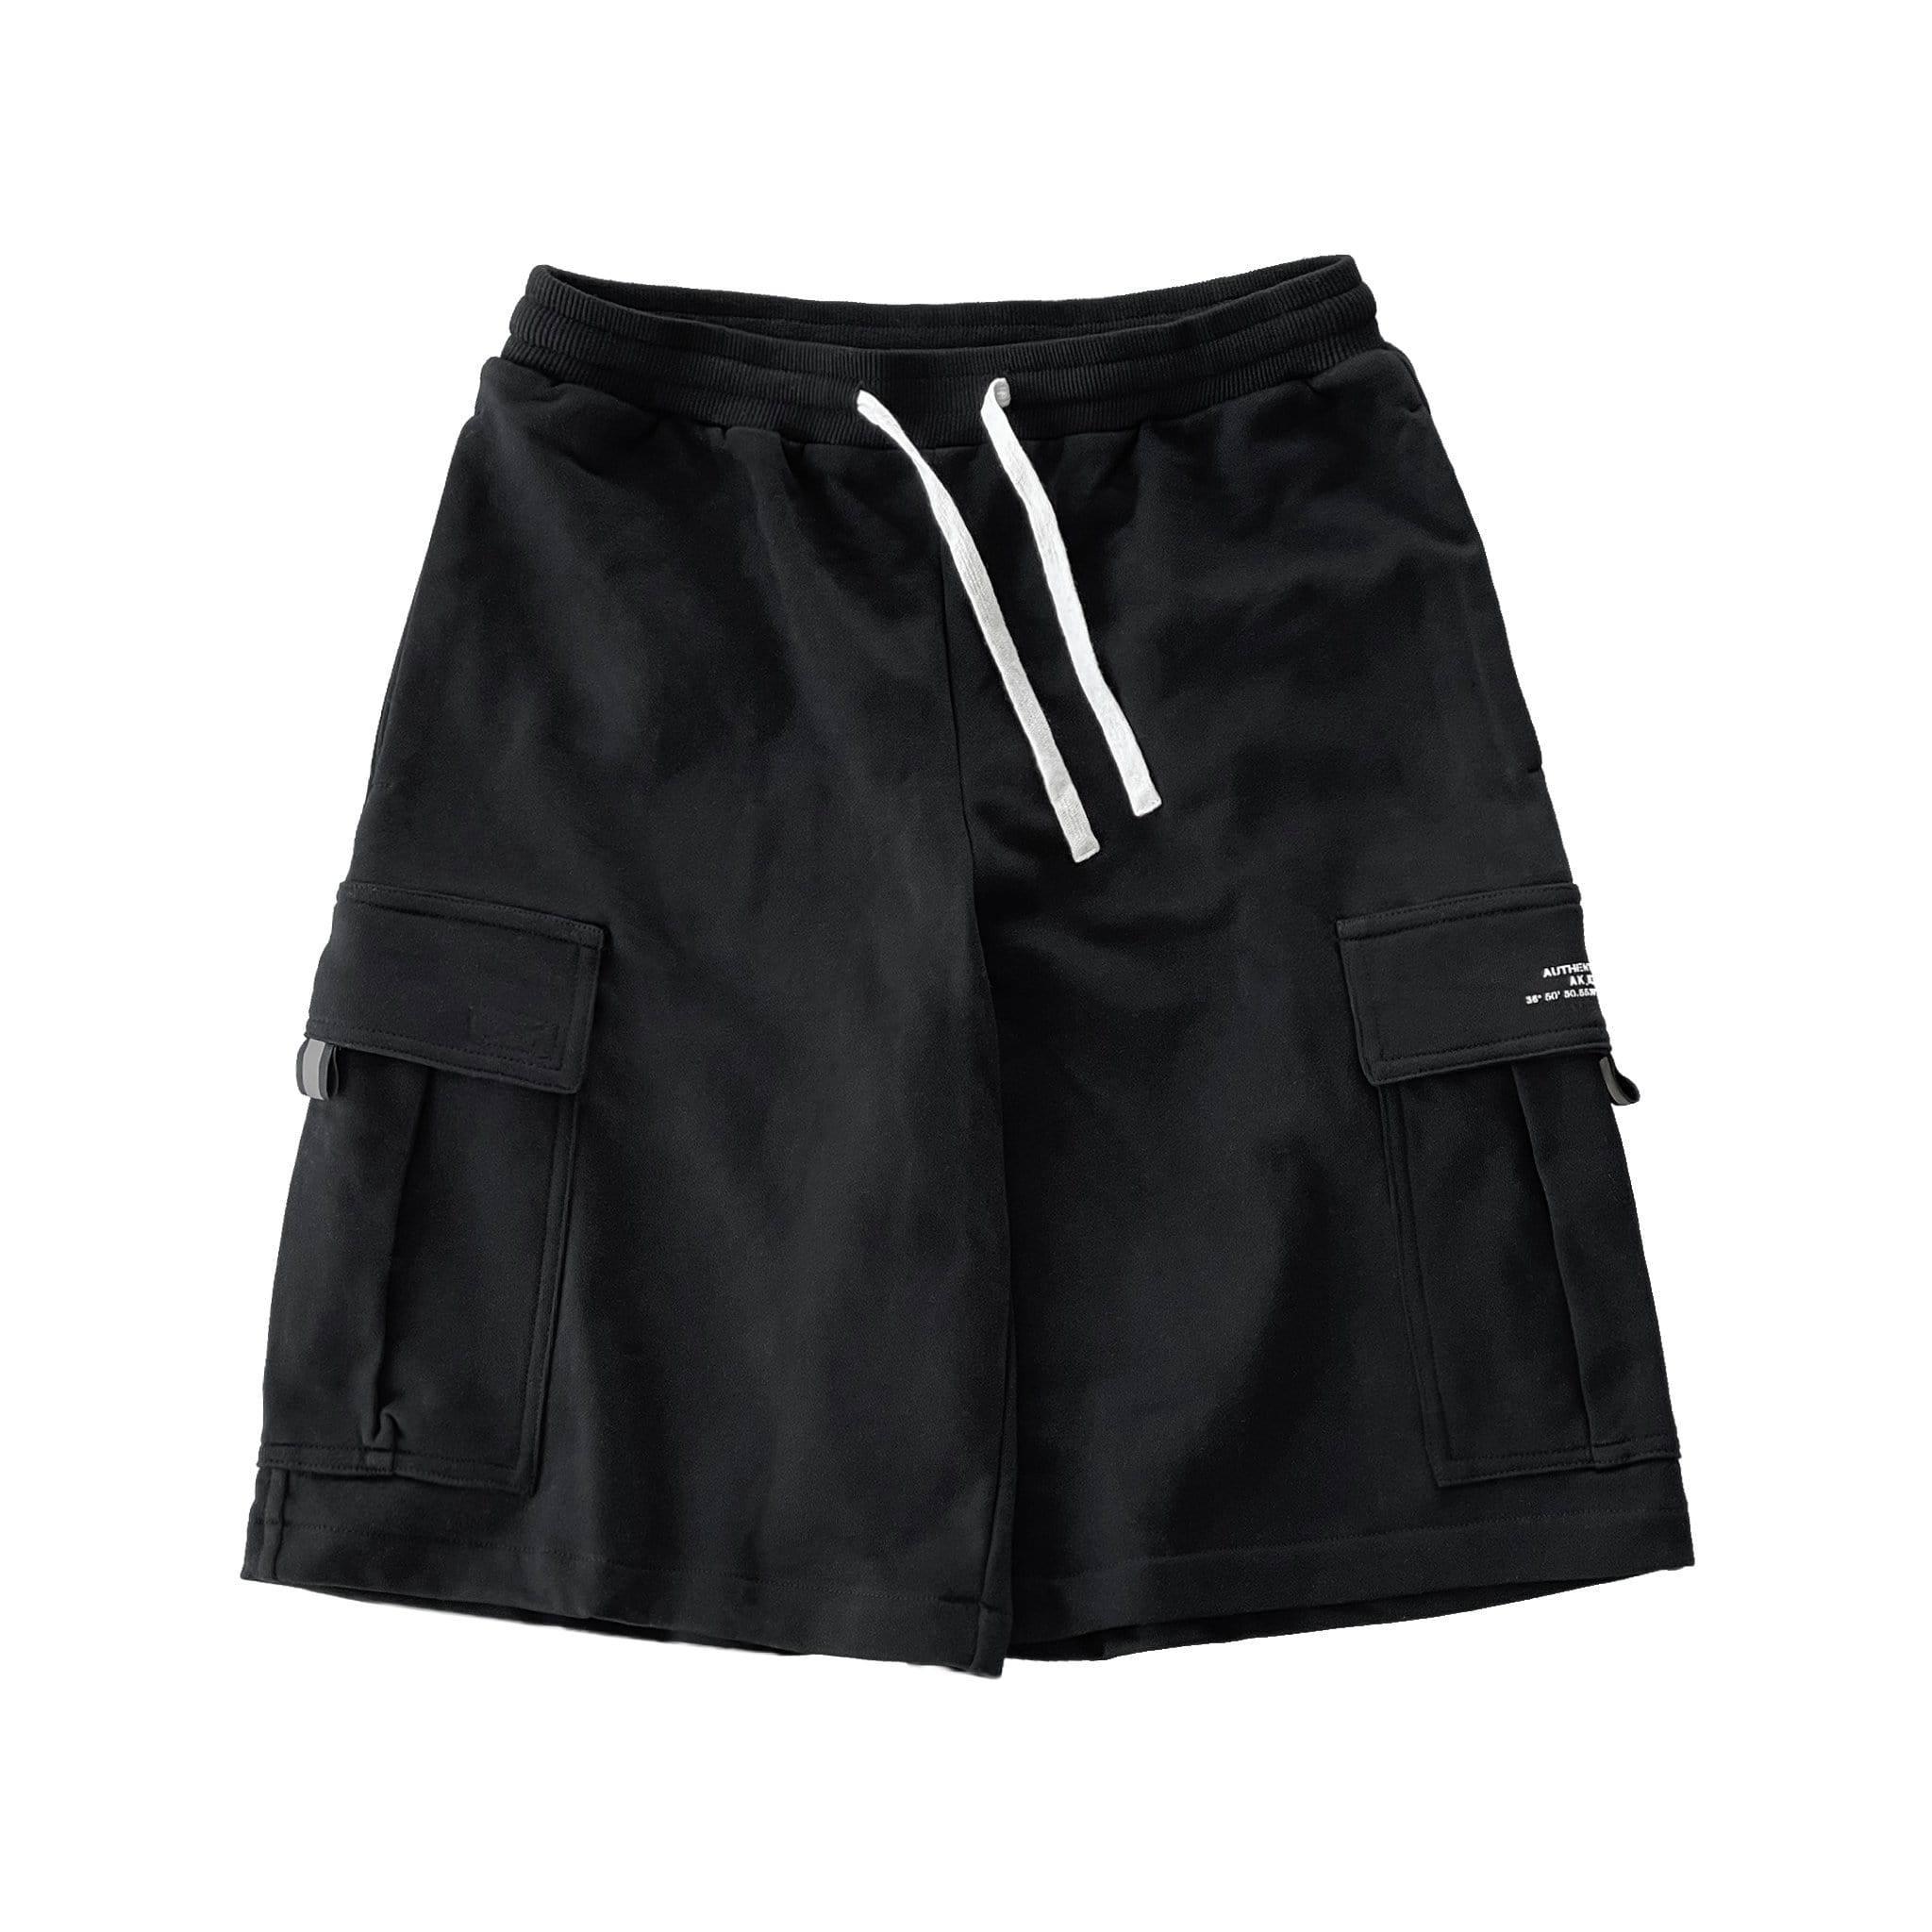 Heavyweight sweat cargo track shorts by New Zealand skate and streetwear clothing label VIC Apparel. Loose baggy fit. Screen printed logo. Reflective pull on cargo pocket flap.